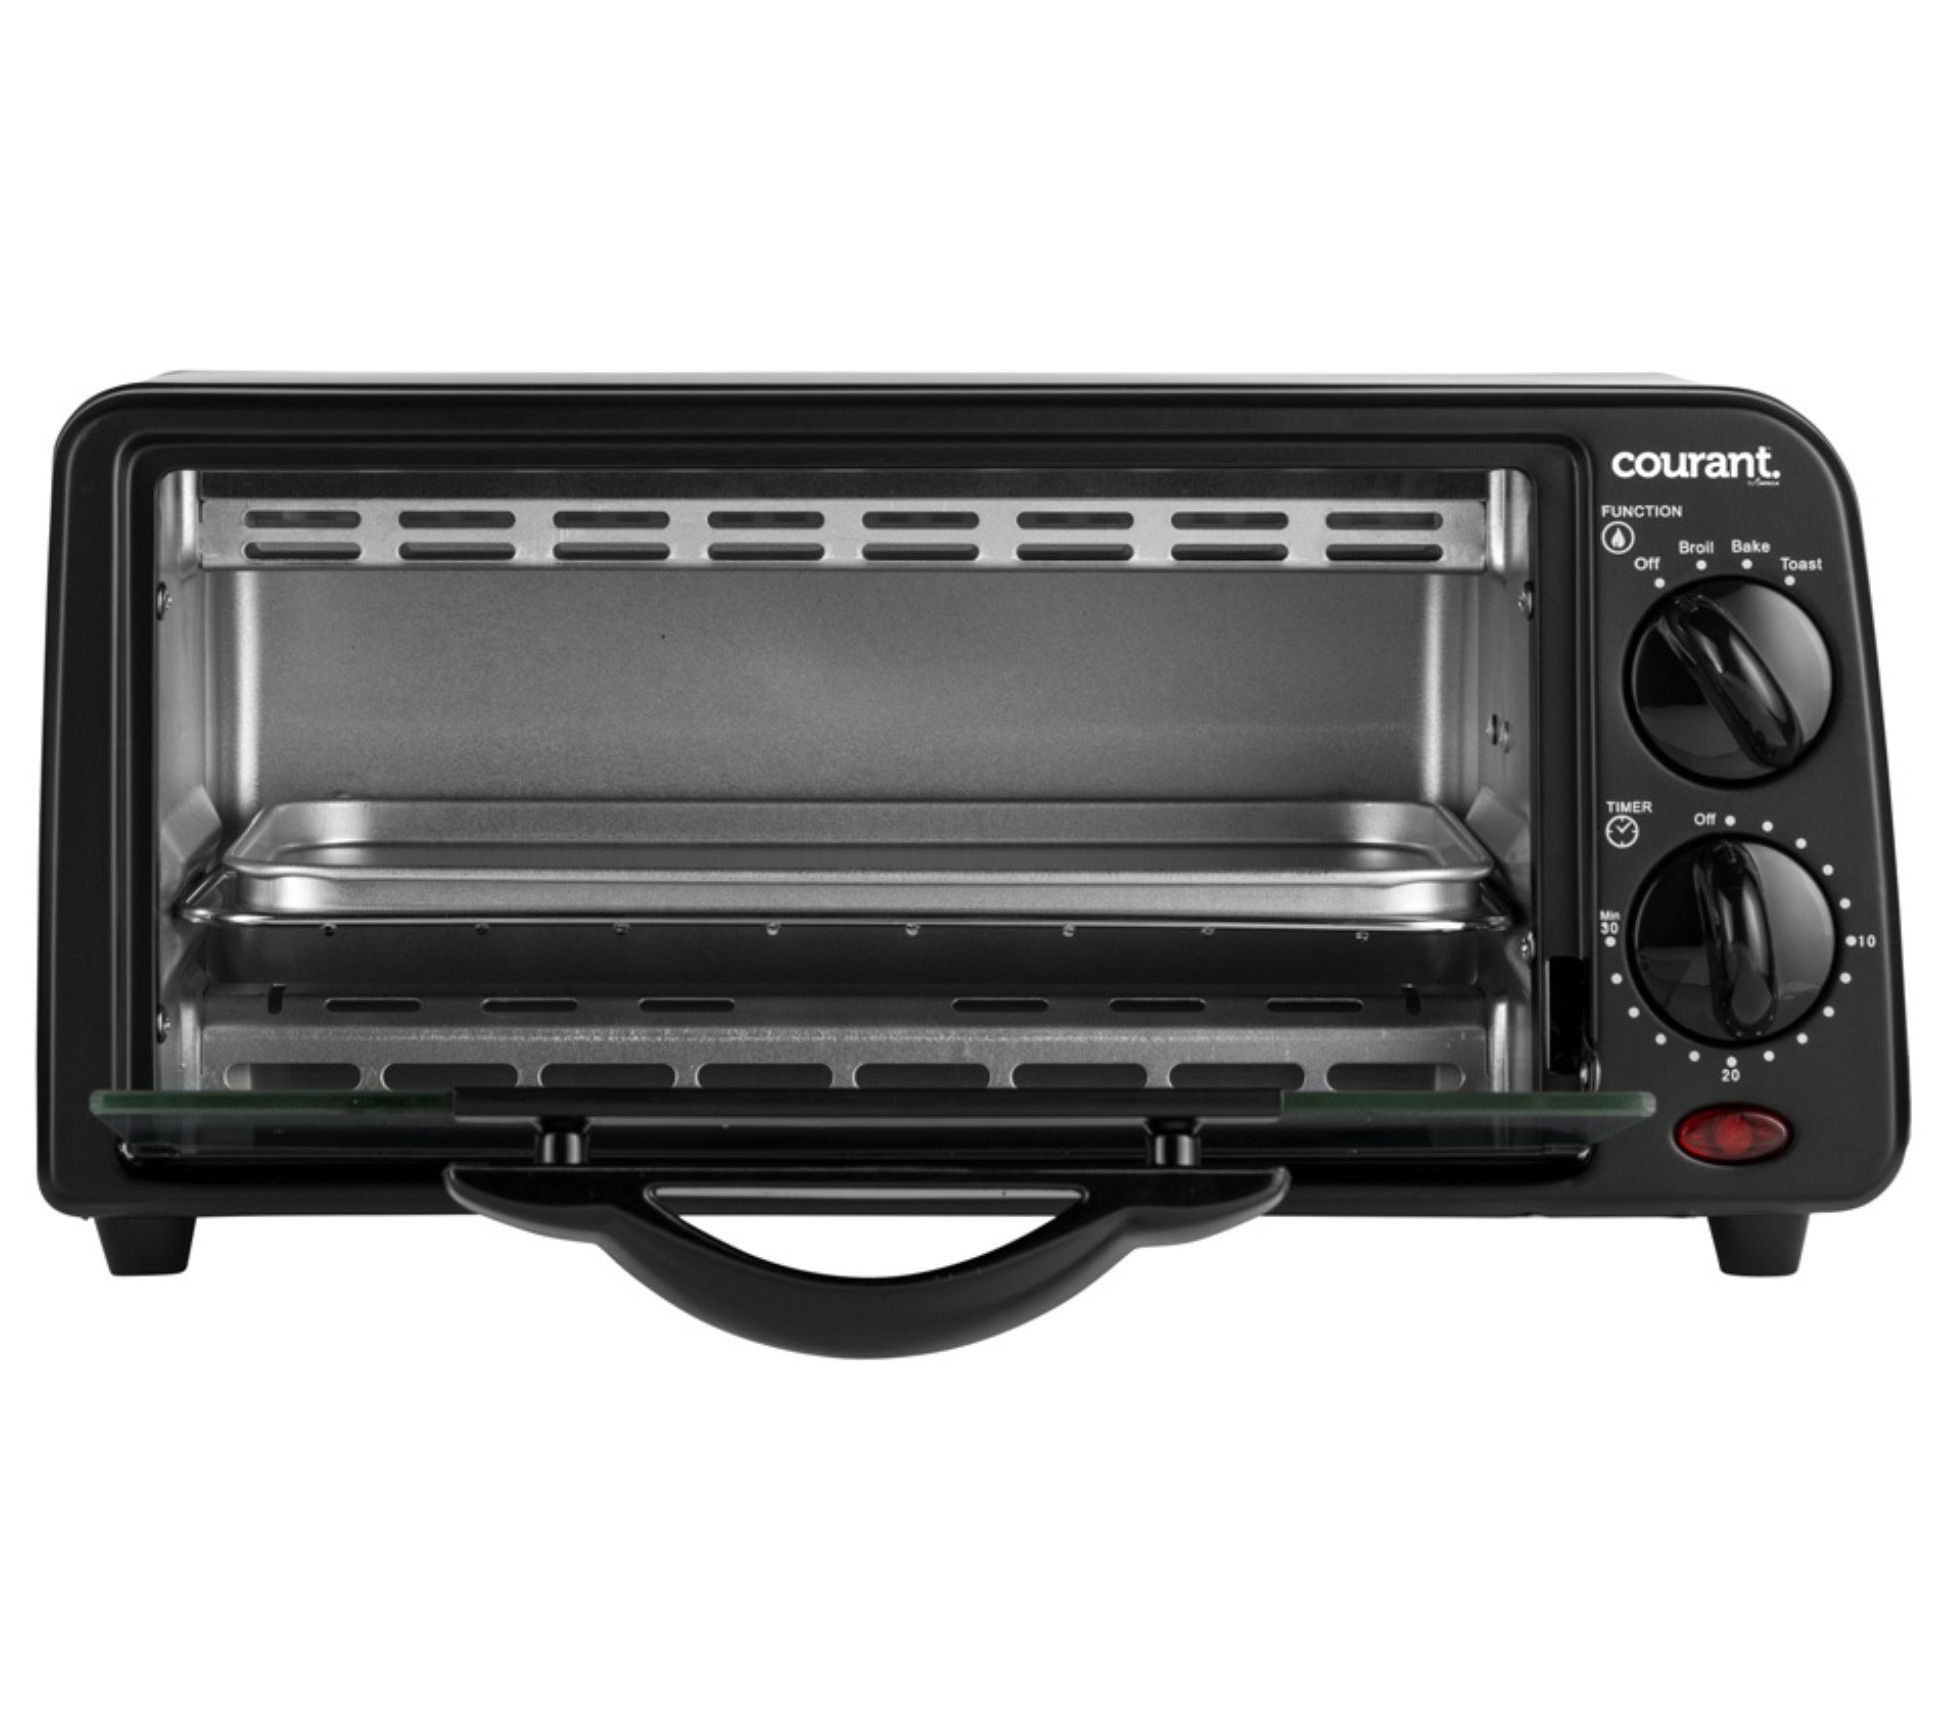  8-Slice Wide Countertop Toaster Oven - for Bake Broil